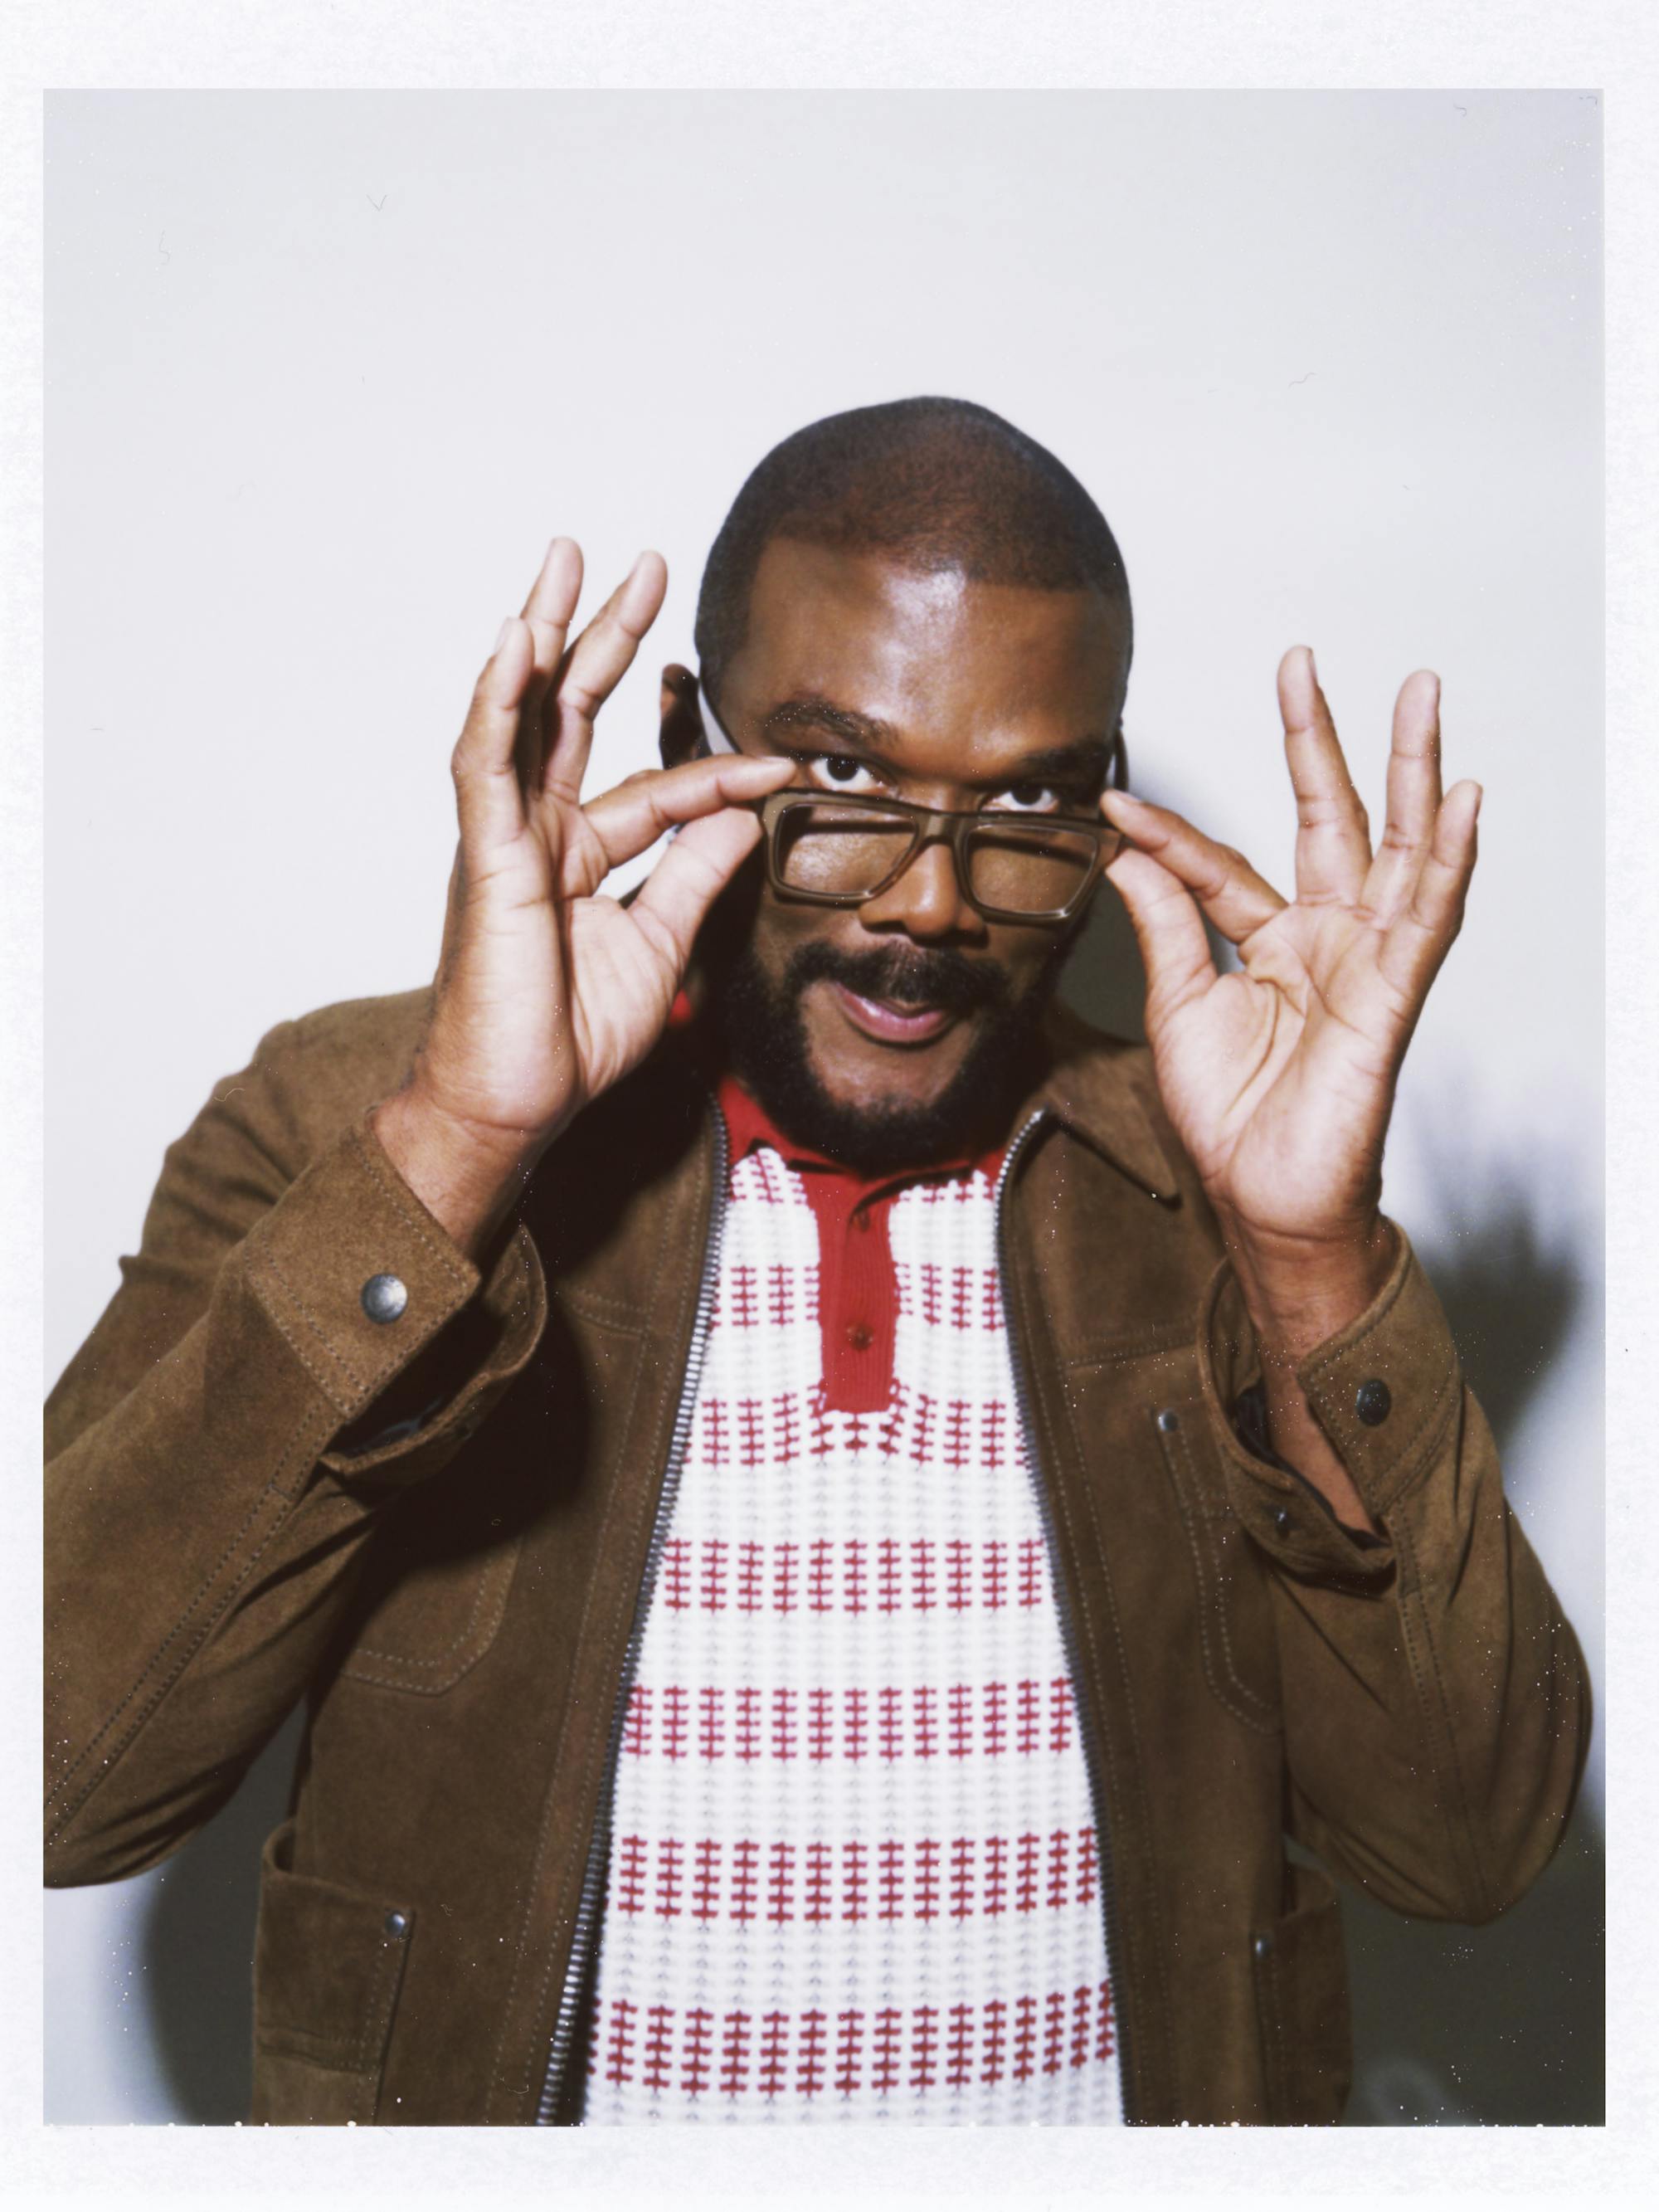 Tyler Perry wears a white and red shirt under a brown suede jacket. He tilts his glasses down at the camera.